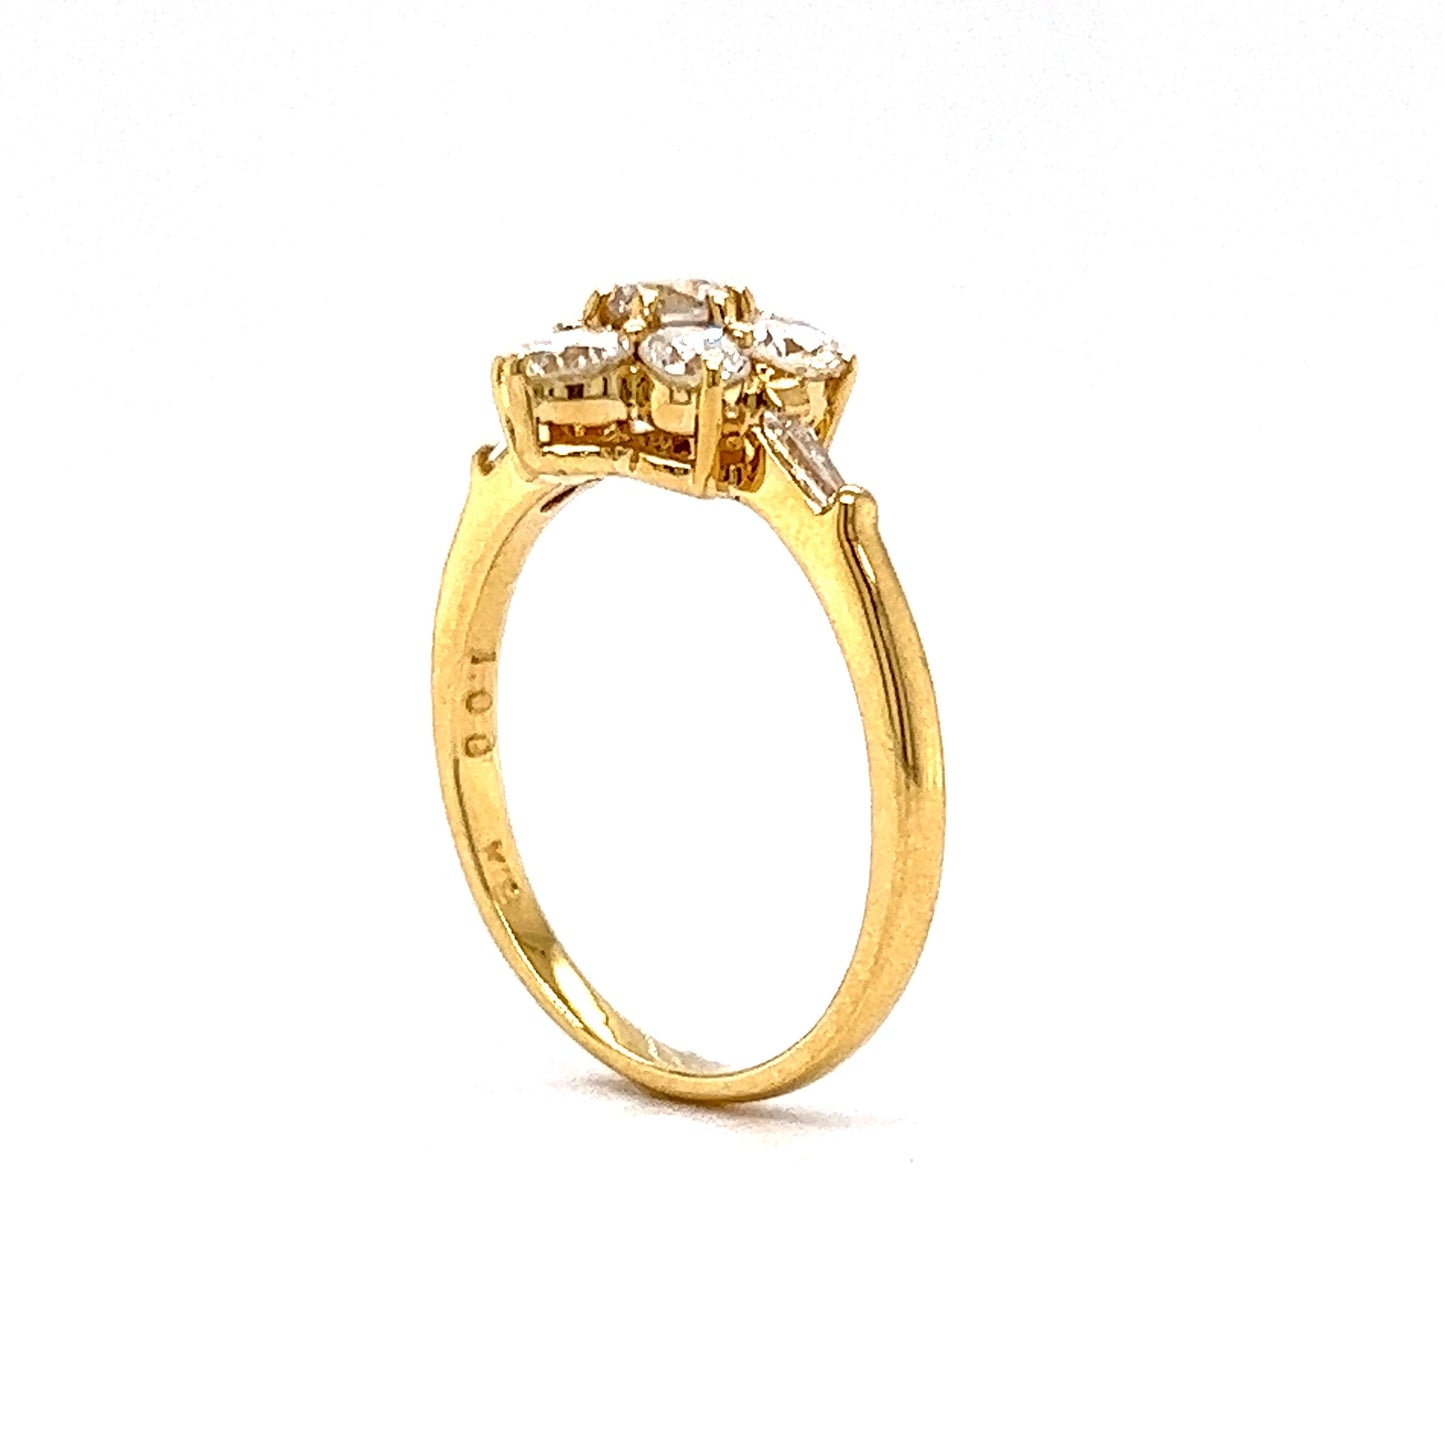 Modern 1.00 Diamond Cluster Engagement Ring in 18k Yellow Gold